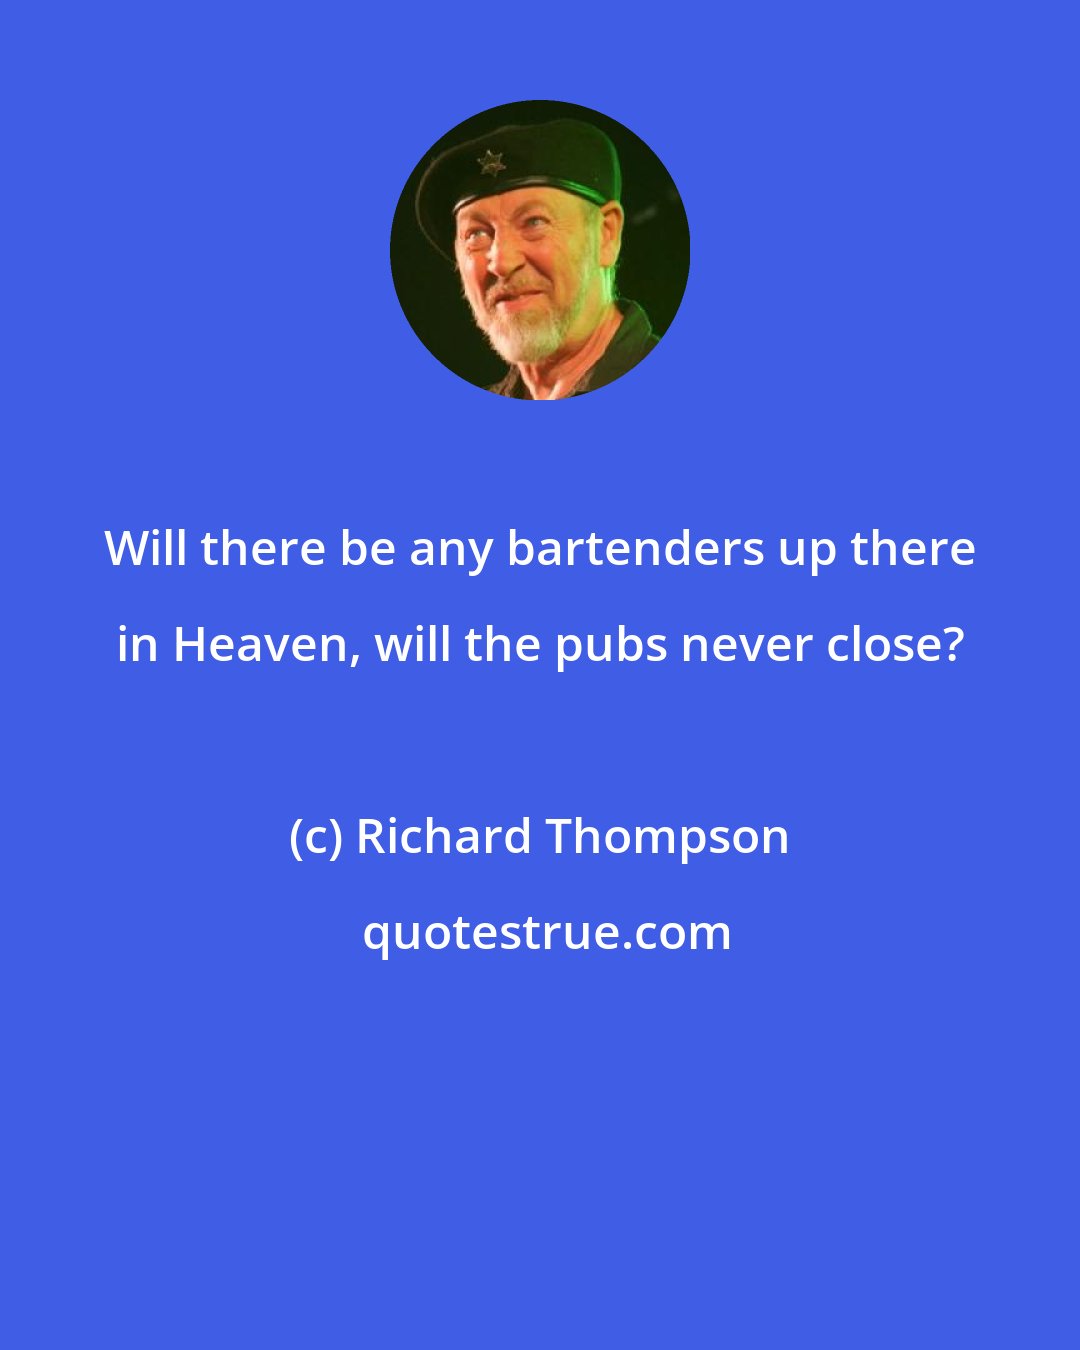 Richard Thompson: Will there be any bartenders up there in Heaven, will the pubs never close?